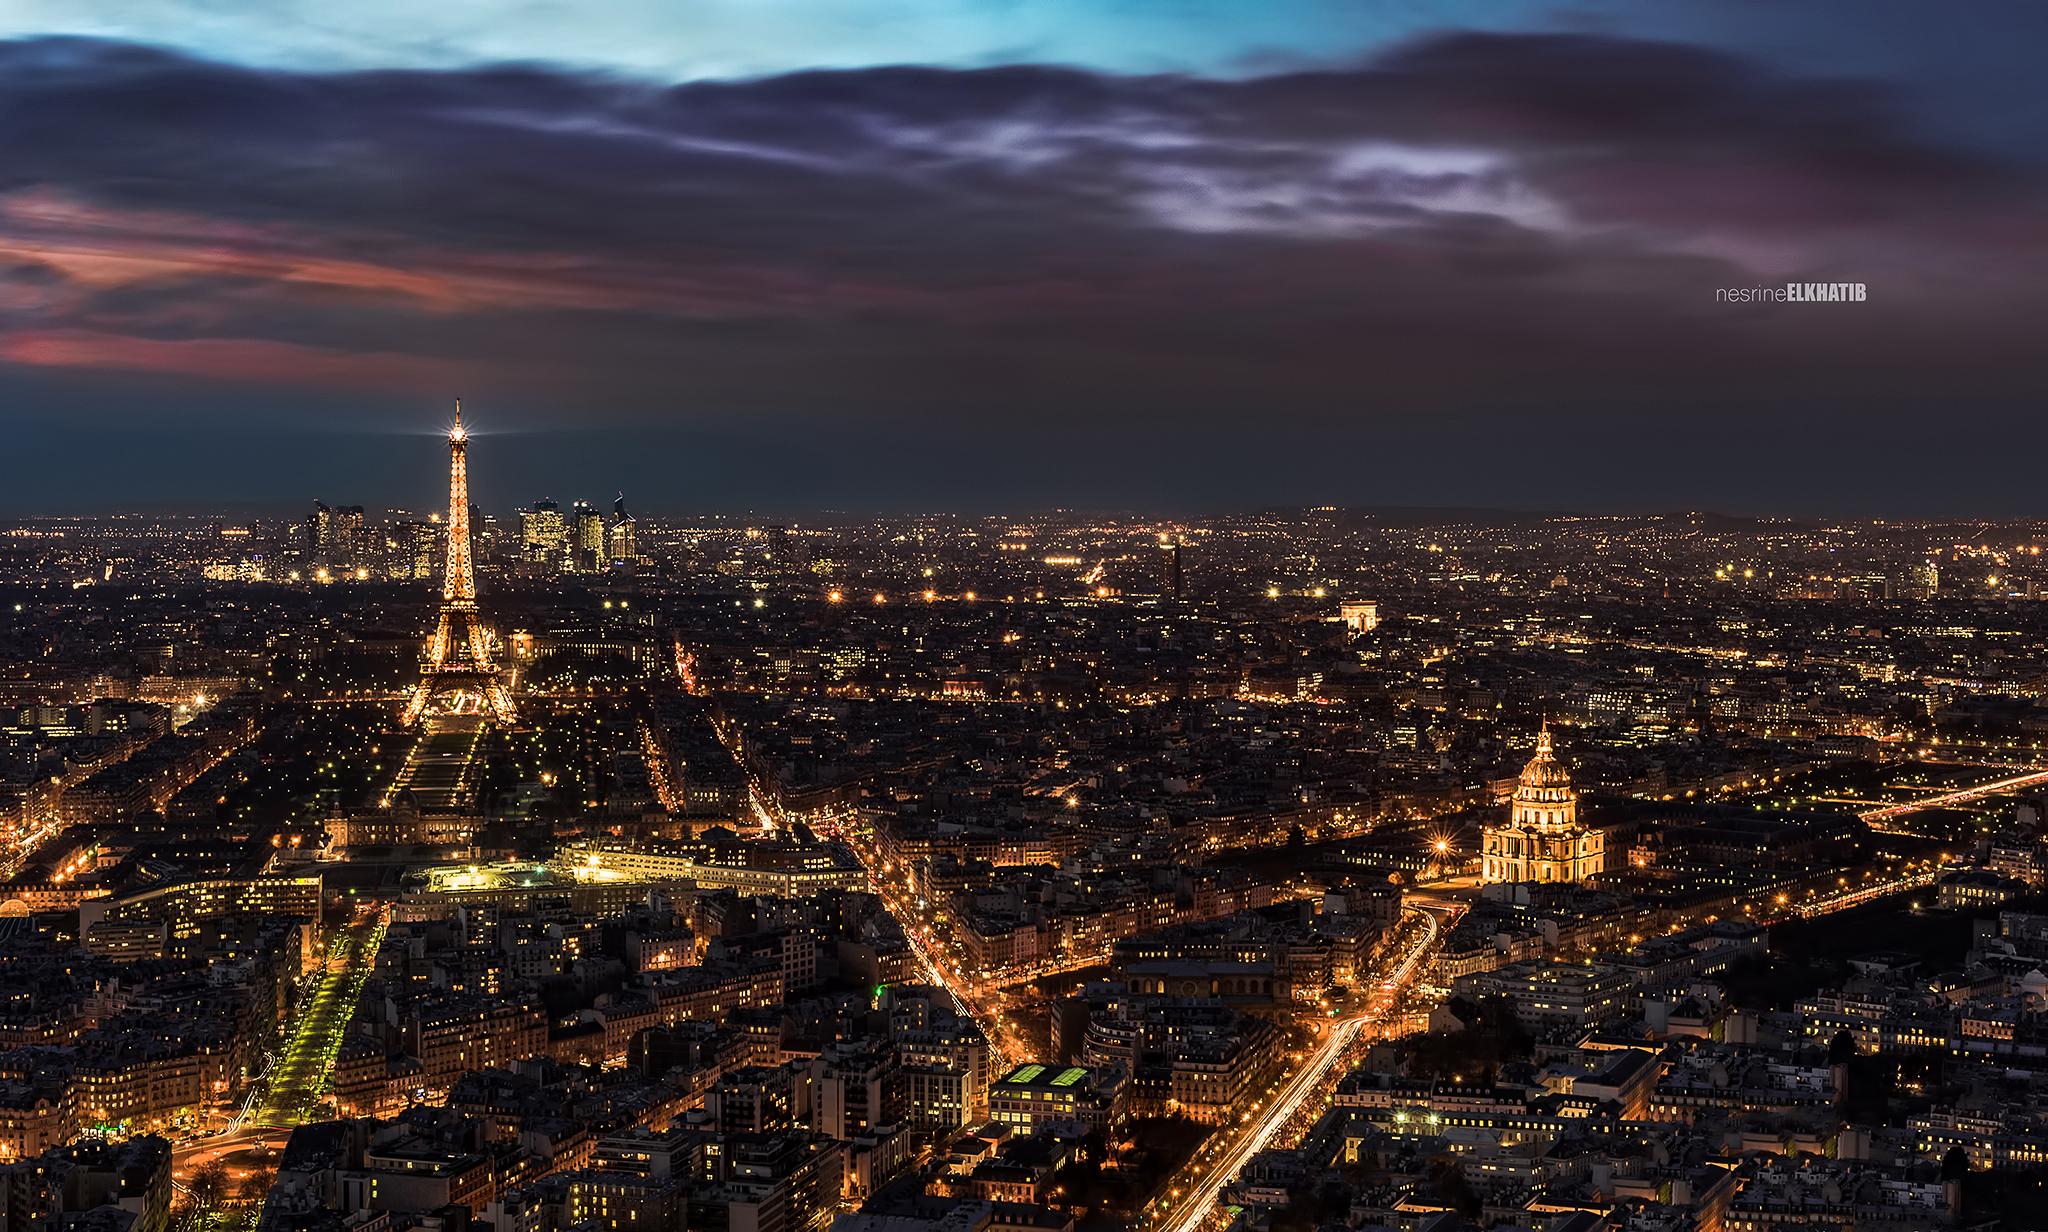 The City of Lights Paris from Montparnasse Tower